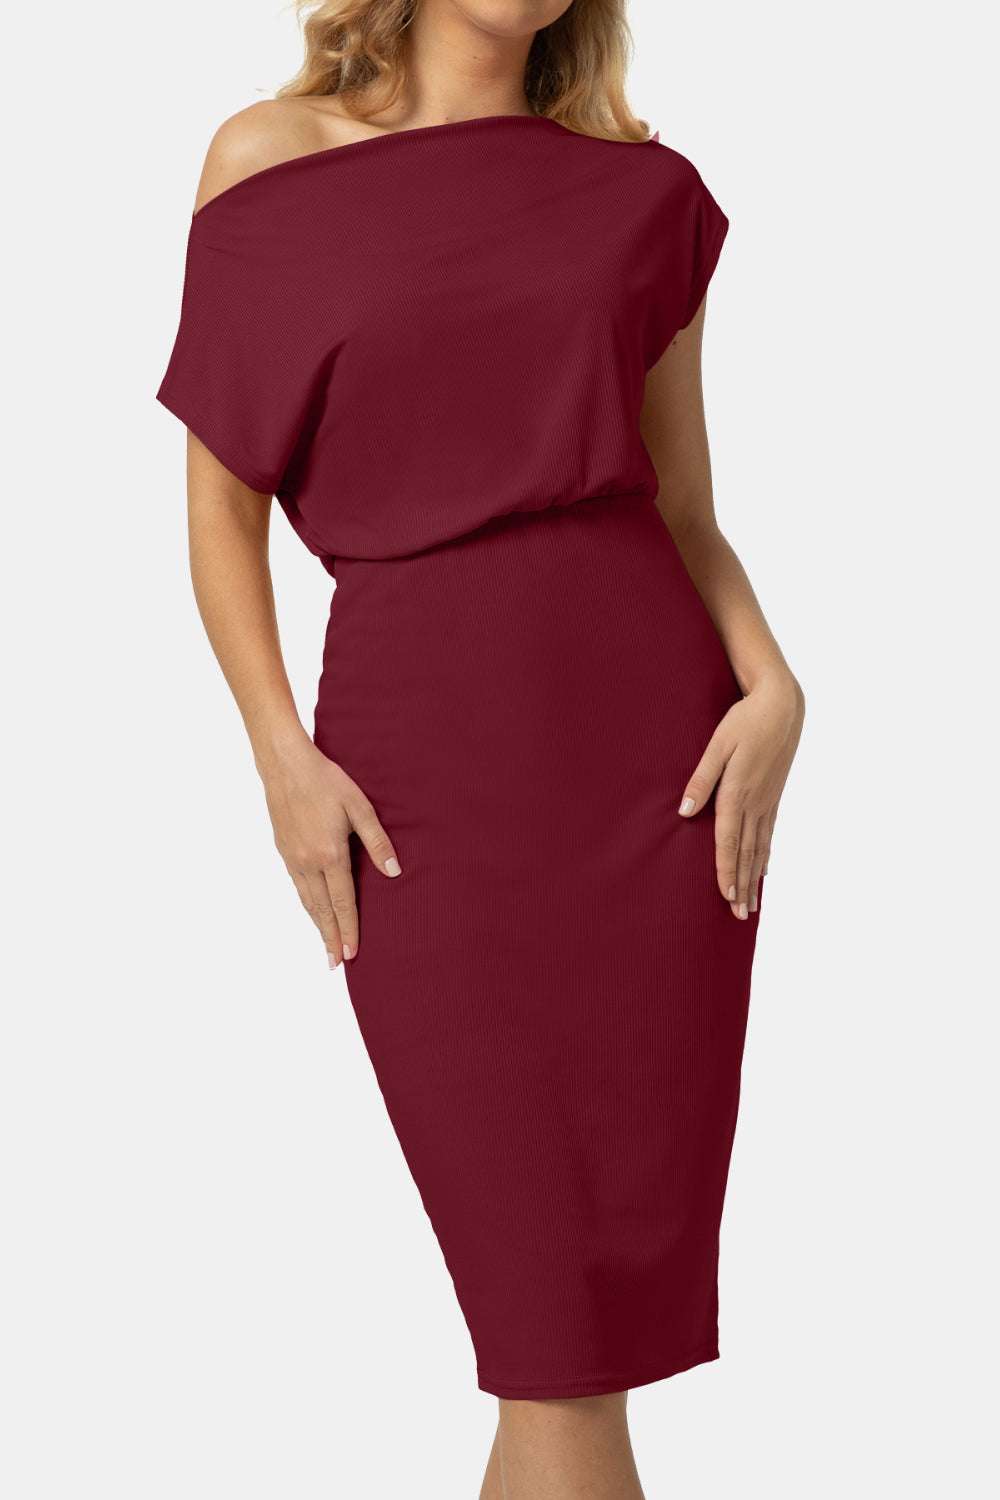 Boat Neck Short Sleeve Knee-Length Dress - Casual & Maxi Dresses - FITGGINS